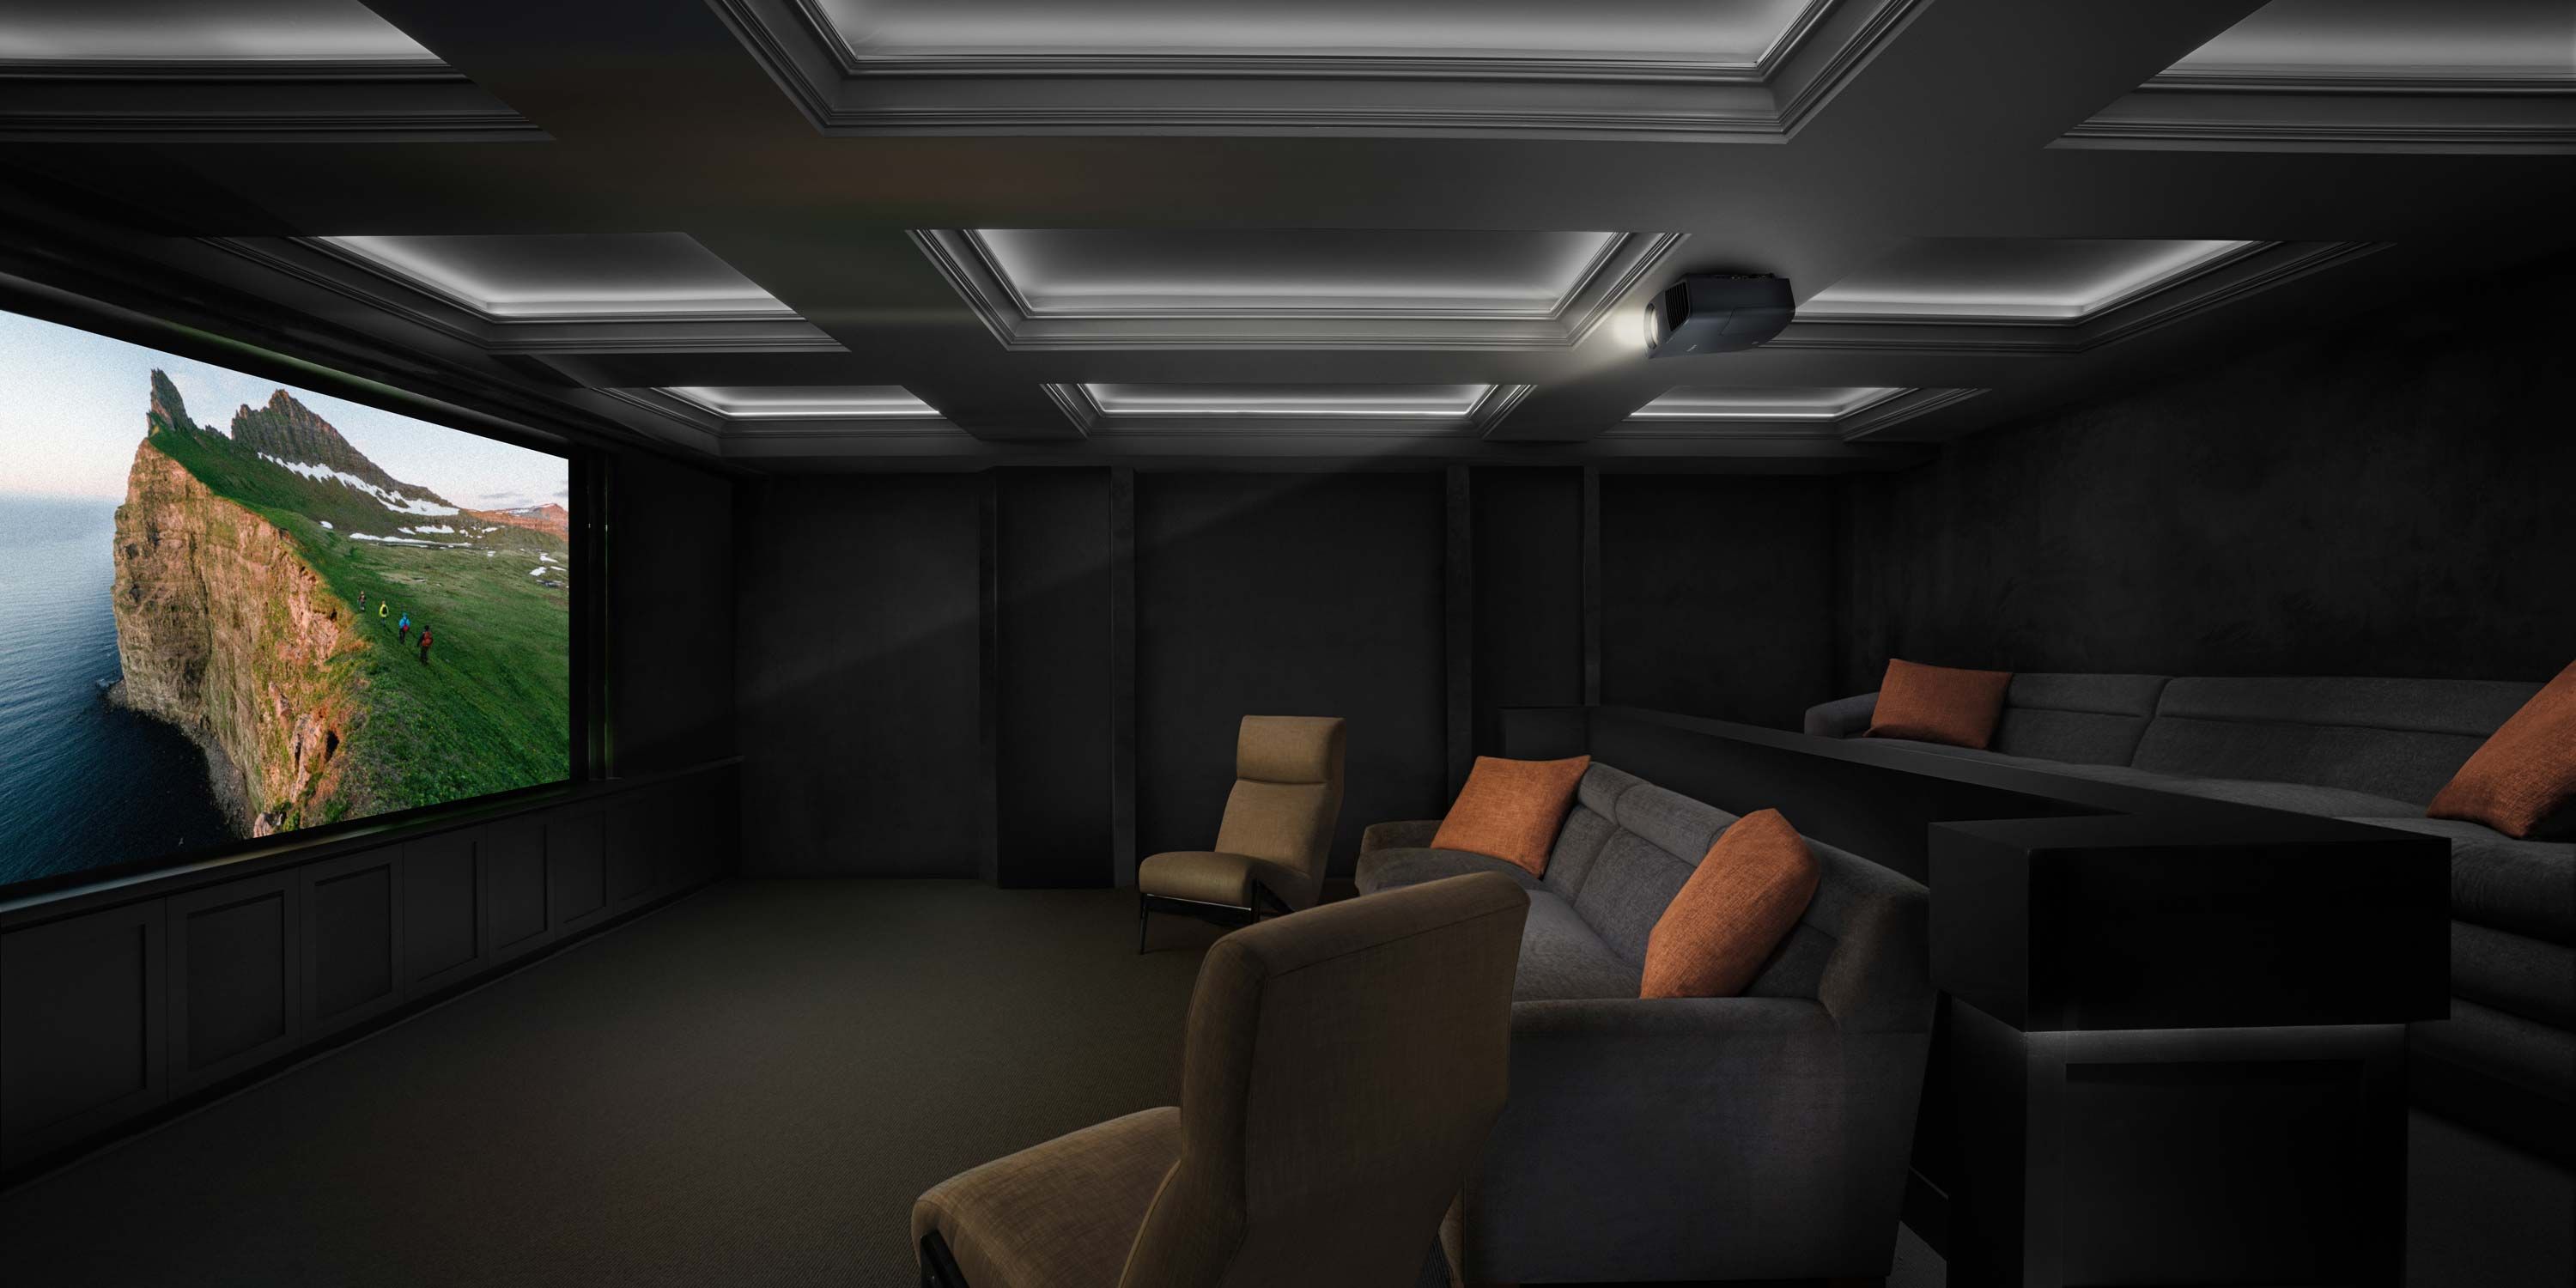 dark walls, led lighting on ceiling, projector screen with nature scene on it